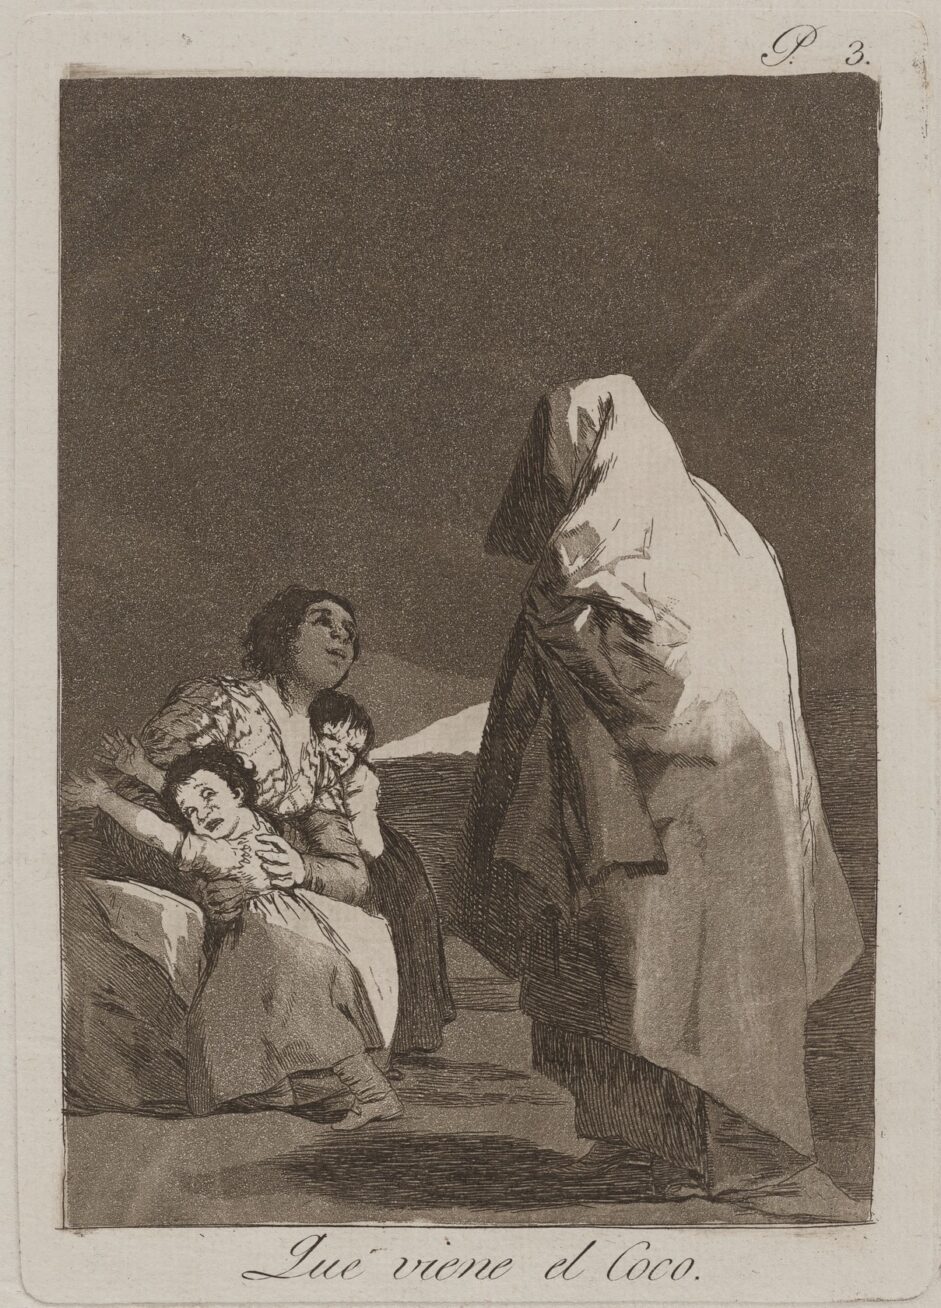 4. Que viene el coco (Here Comes the Bogey-Man), plate 3 from the series Los Caprichos, 1799, etching with aquatint, plate: 8 7/16 in x 6 in; sheet: 11 3/4 in x 8 in. A cloaked figure confronts a woman with two children seated on a bed. The cloaked figure is at right appears to be someone with a large light-colored sheet draped over themselves. Light shines on their back from the right. The mother and two children cower at lower left, the children’s faces showing fear. The mother looks up at the cloaked figure clutching the children. The upper third of the etching is darkly shaded. The words “Que Viene el Coco” appear at bottom.